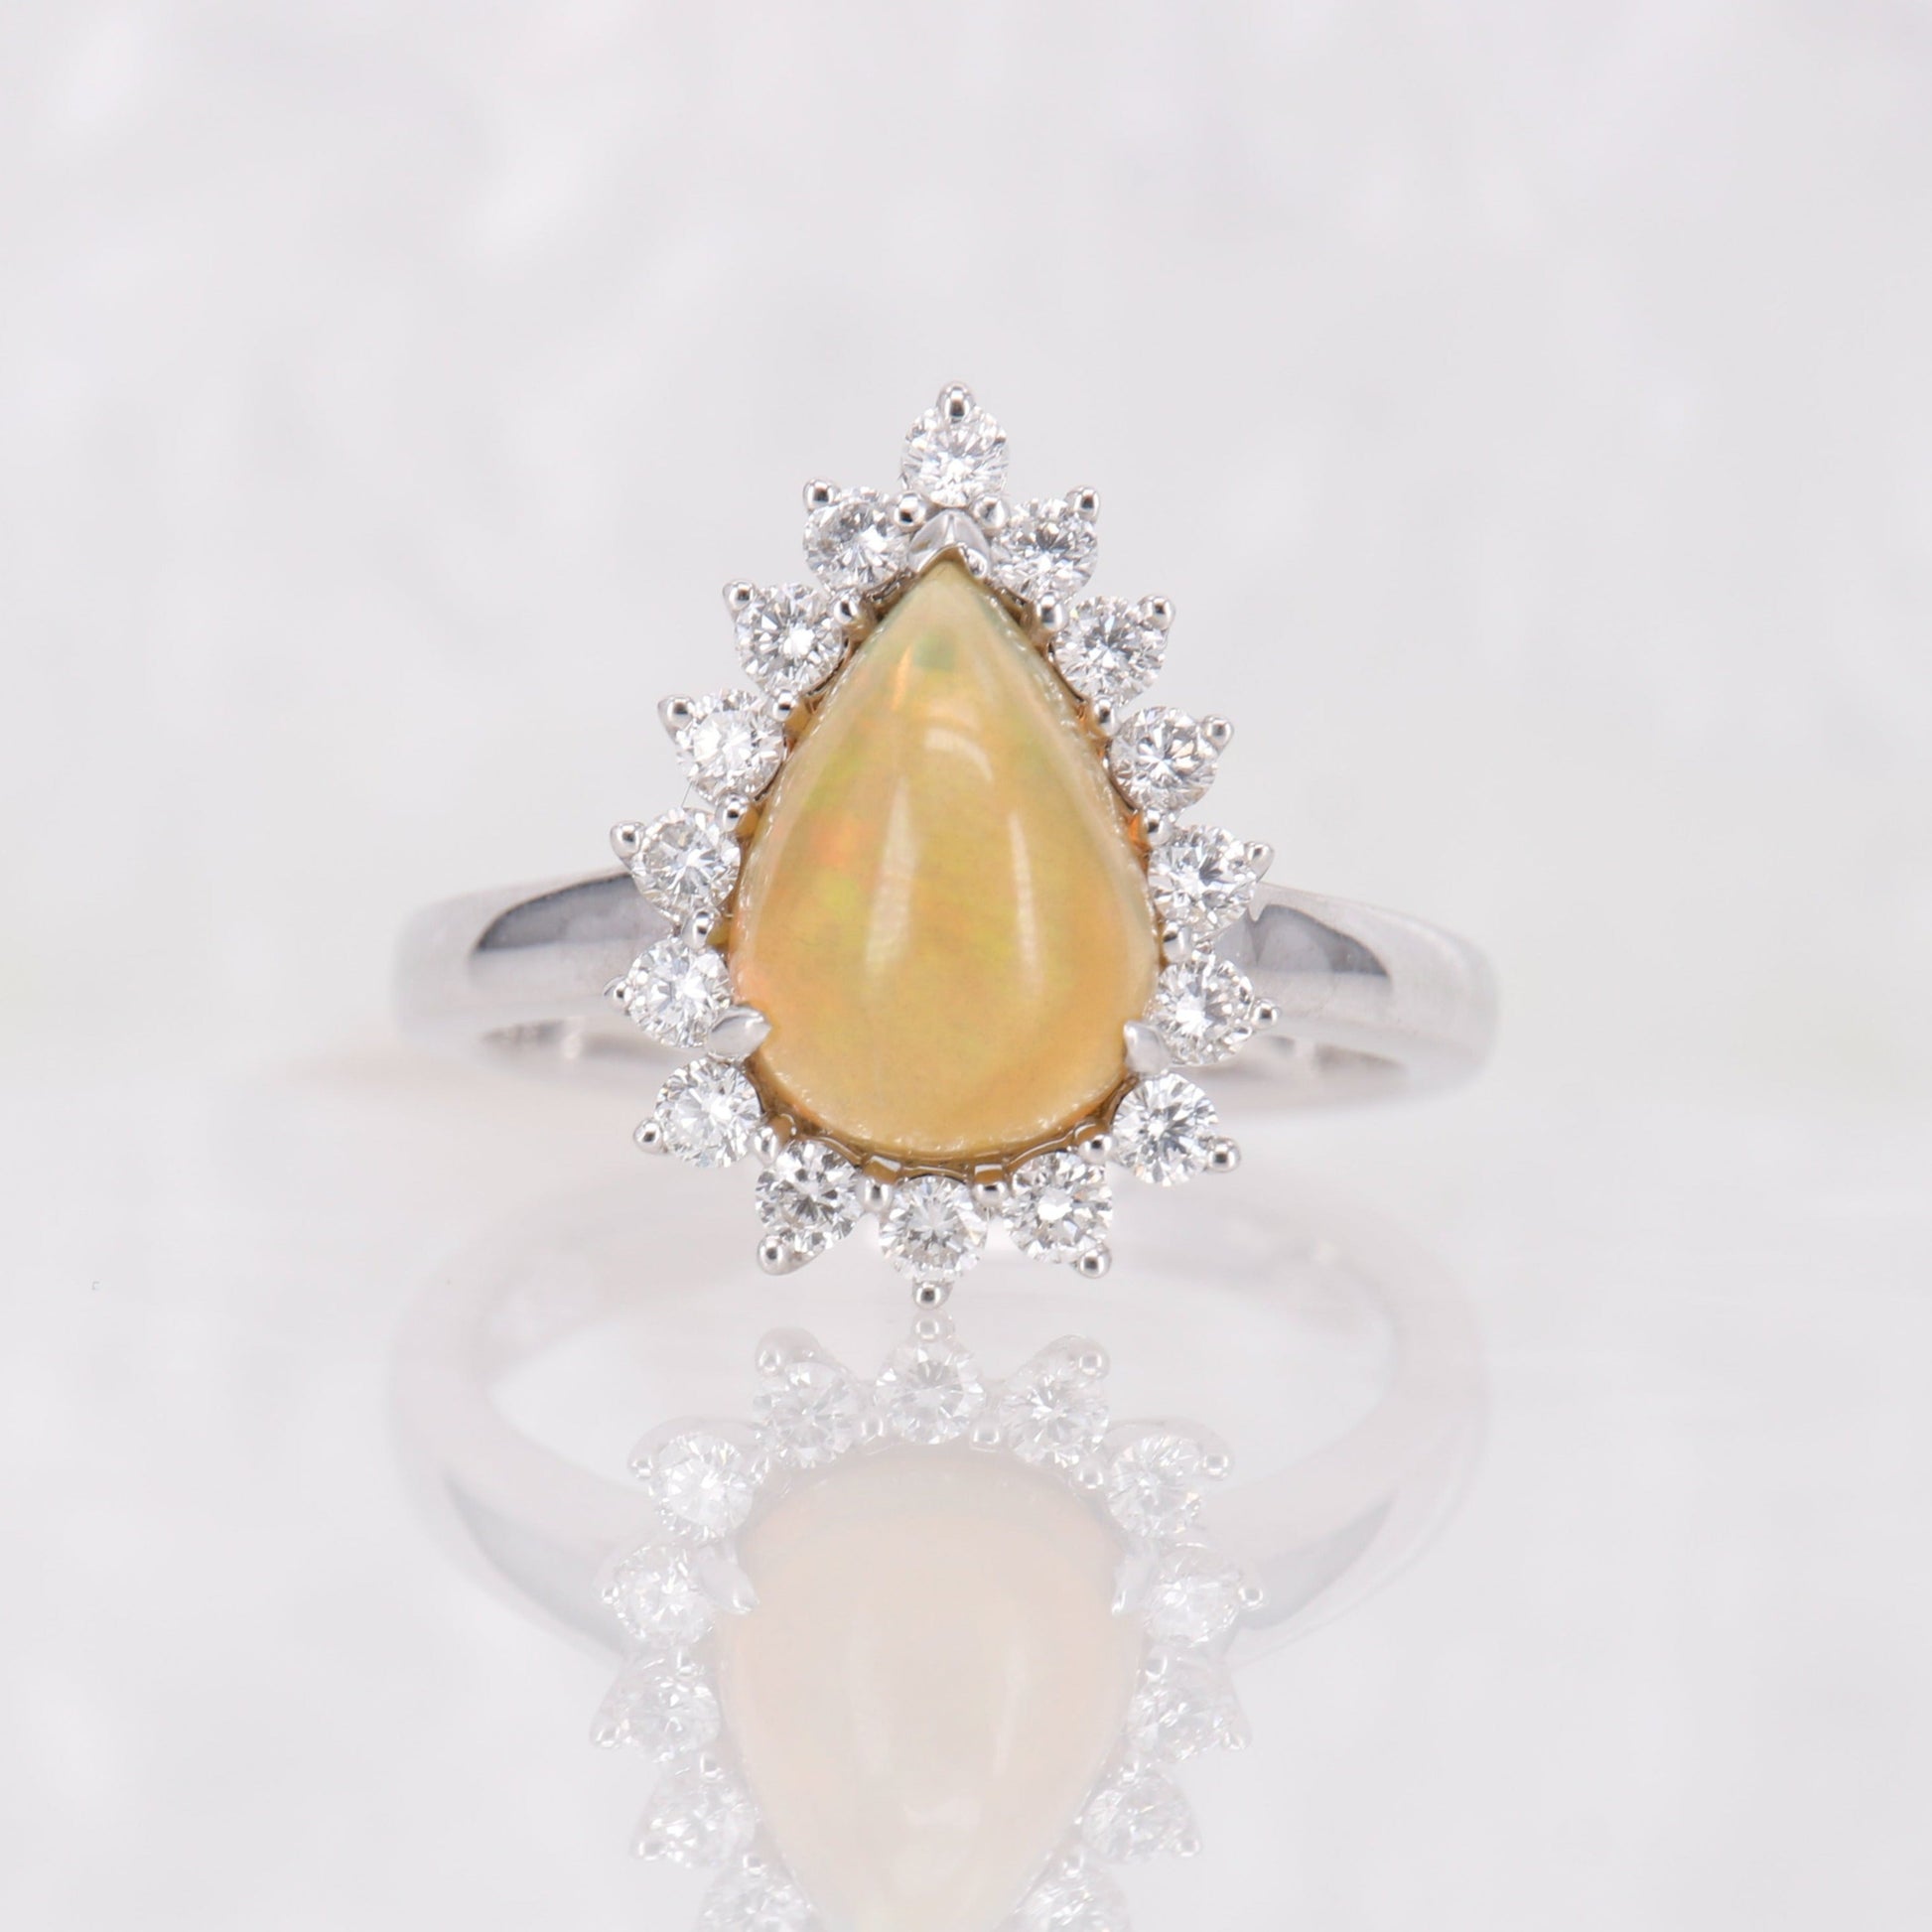 Opal and Diamond Ring. Pear cut opal surrounded by a halo of round brilliant diamonds. 